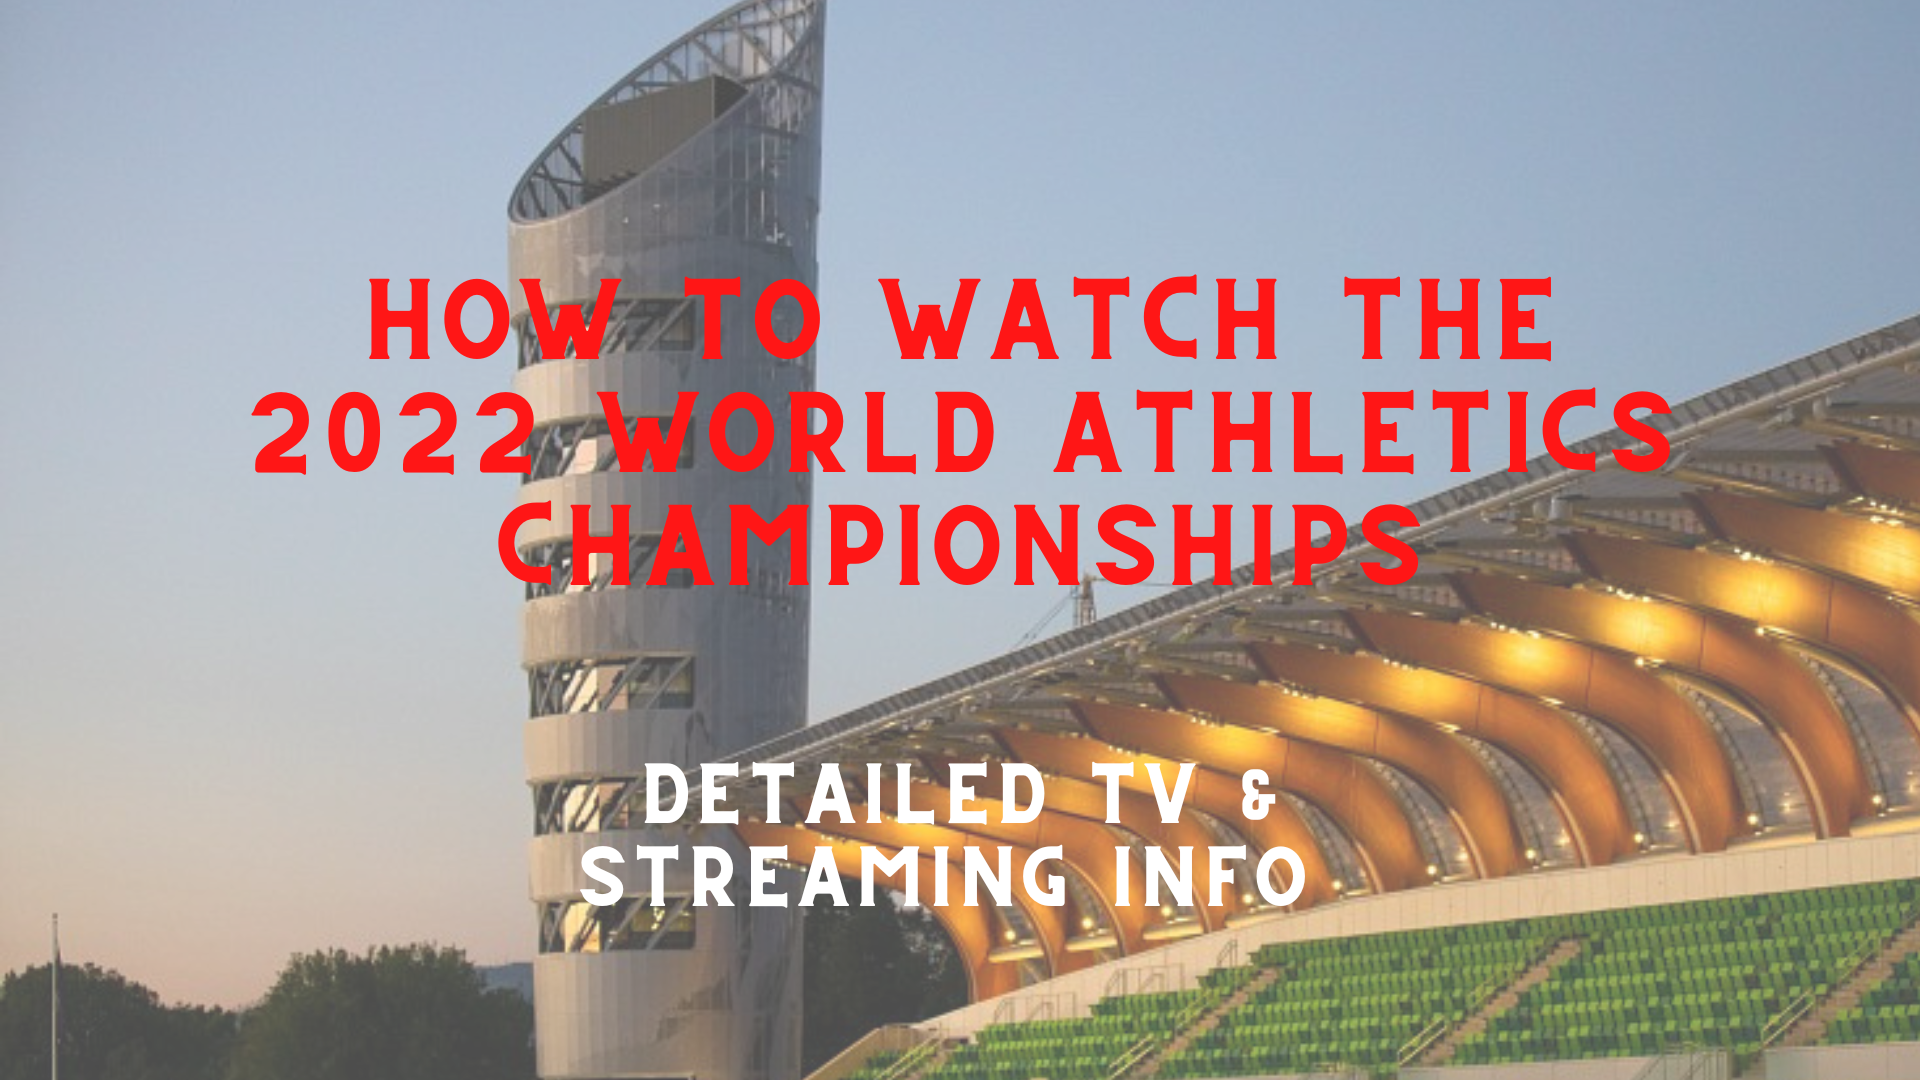 Television and Streaming Information for 2022 World Athletics Championships in Eugene